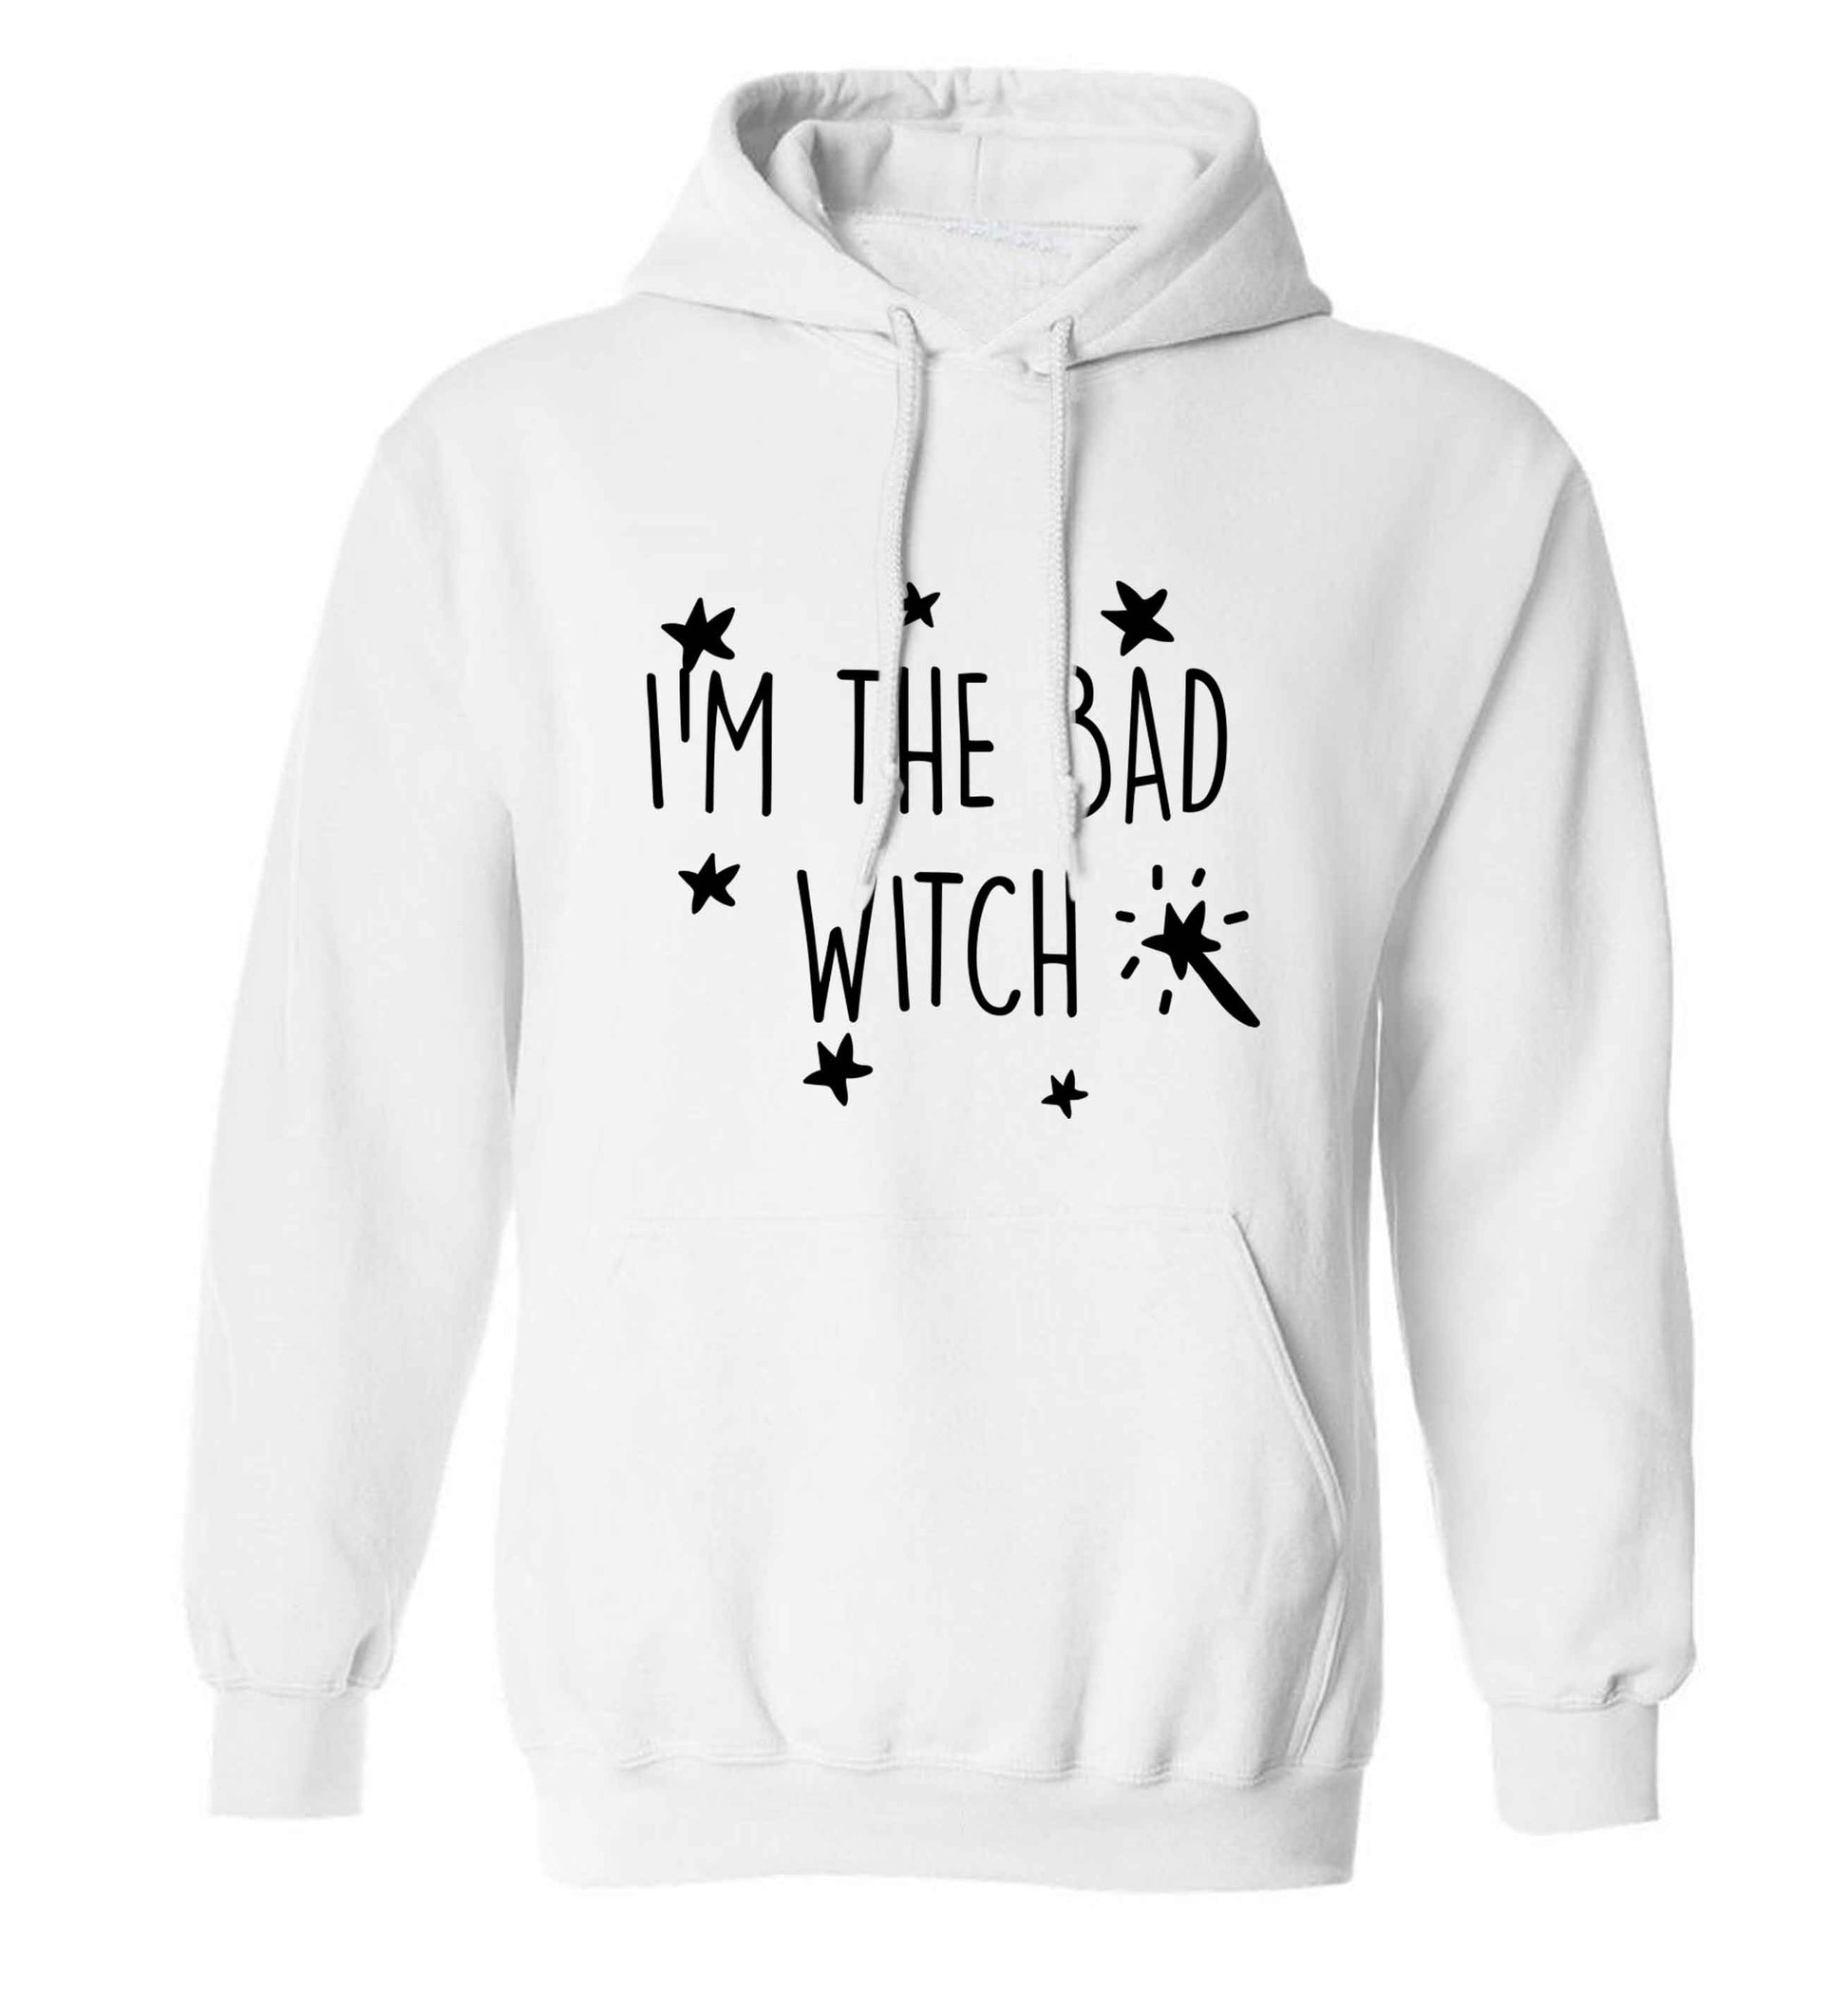 Bad witch adults unisex white hoodie 2XL